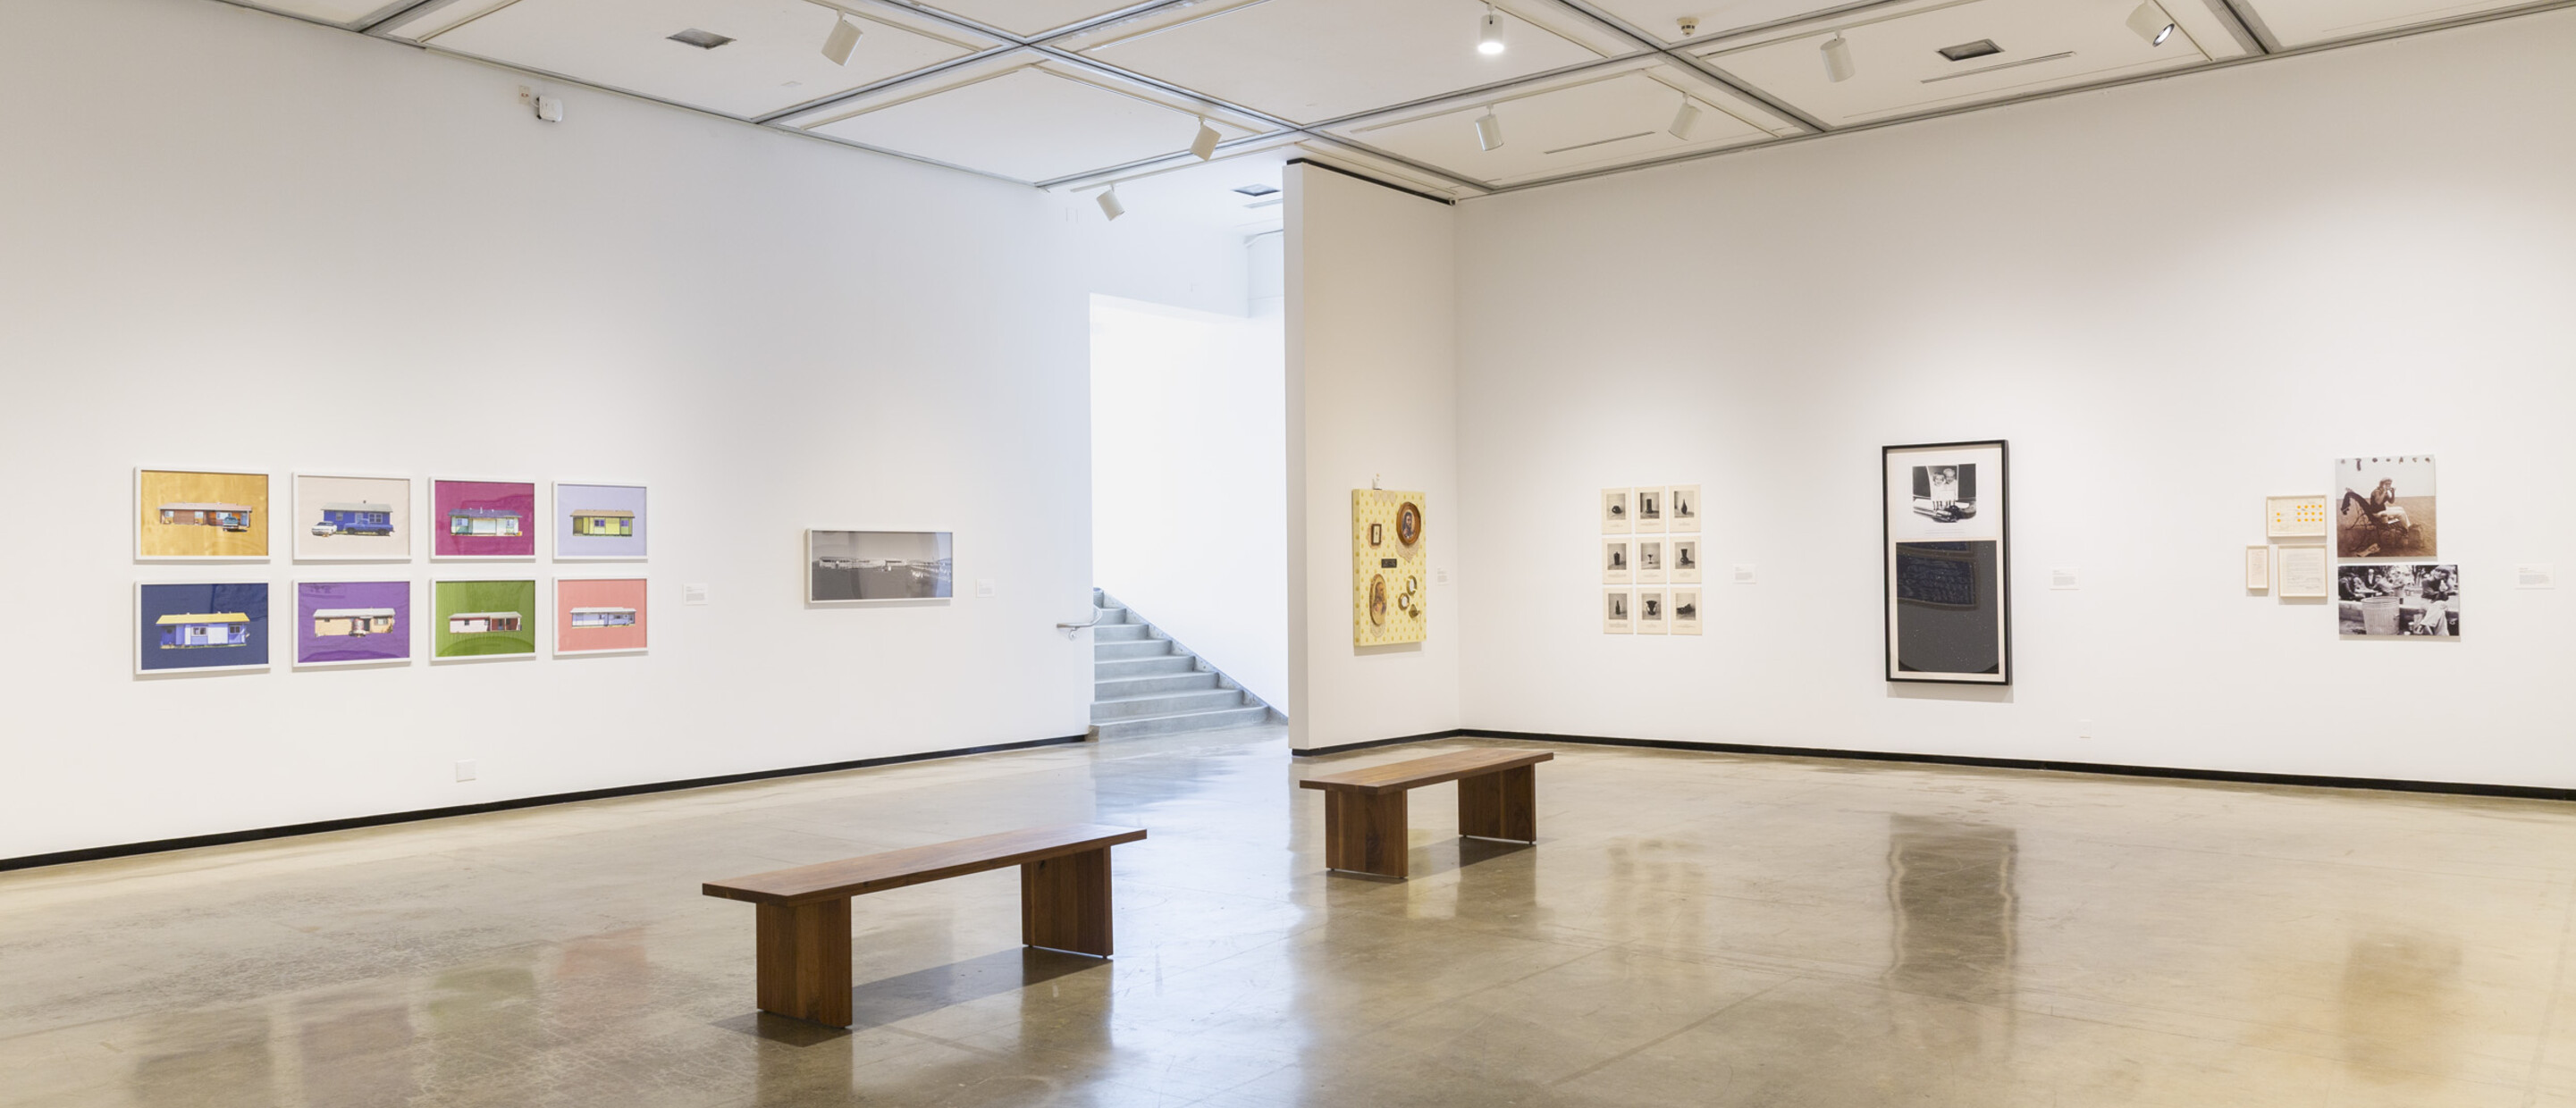 Installation view of an exhibition with artworks on the wall